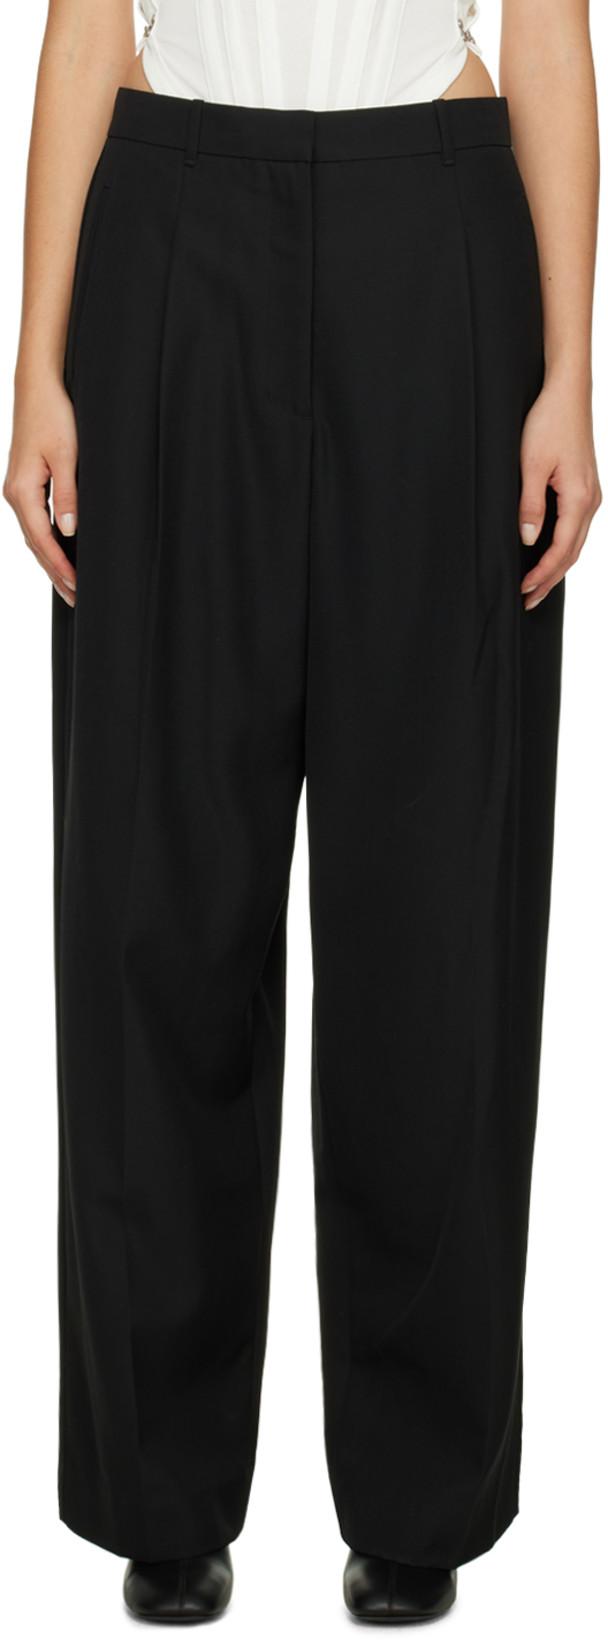 Black Tailored Trousers by 3.1 PHILLIP LIM